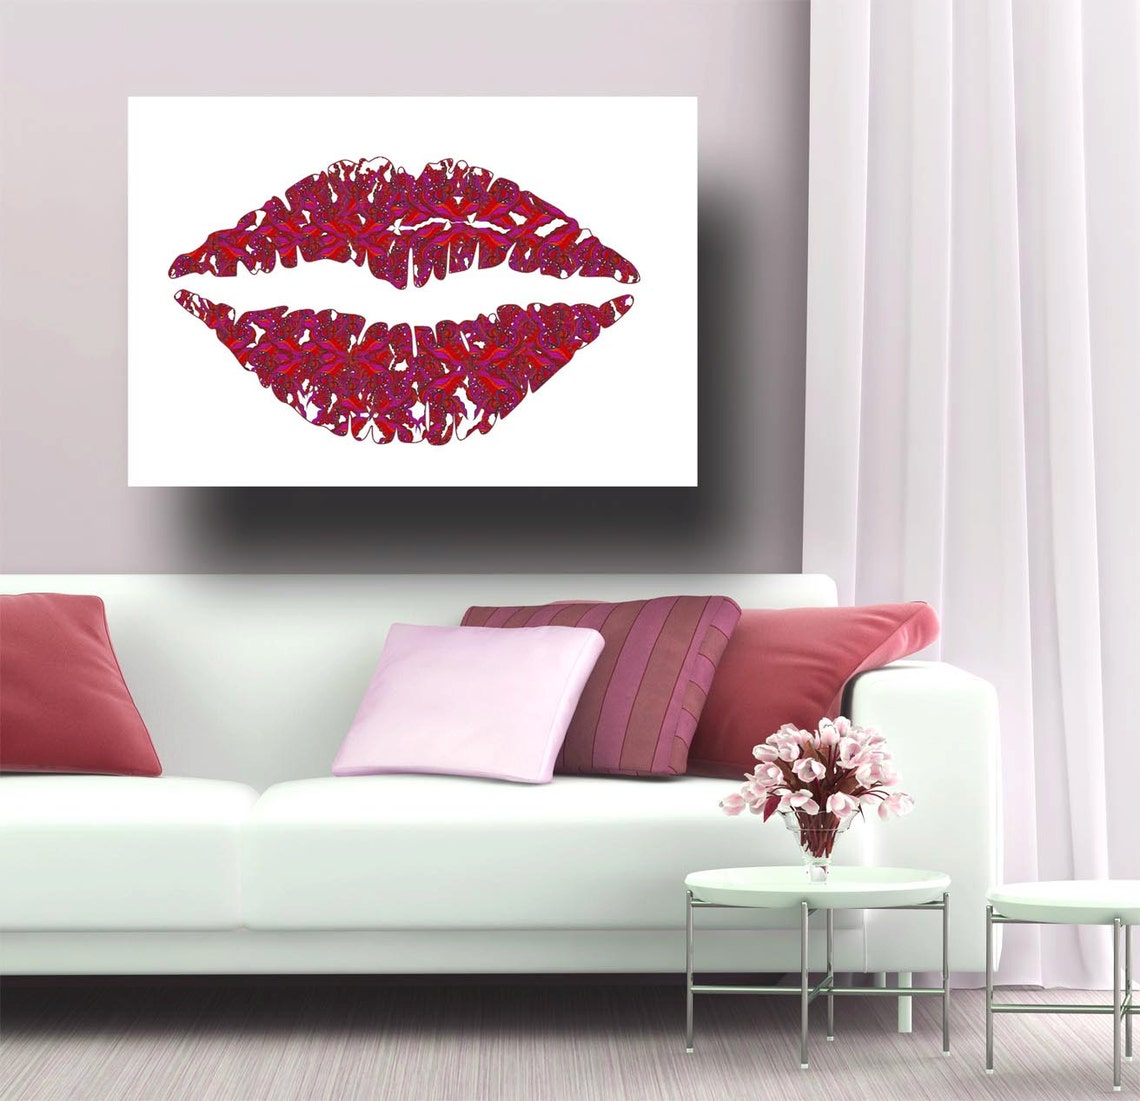 Lips Poster, Painting of Lips, Kiss Artwork, Abstract Art of Lips ...